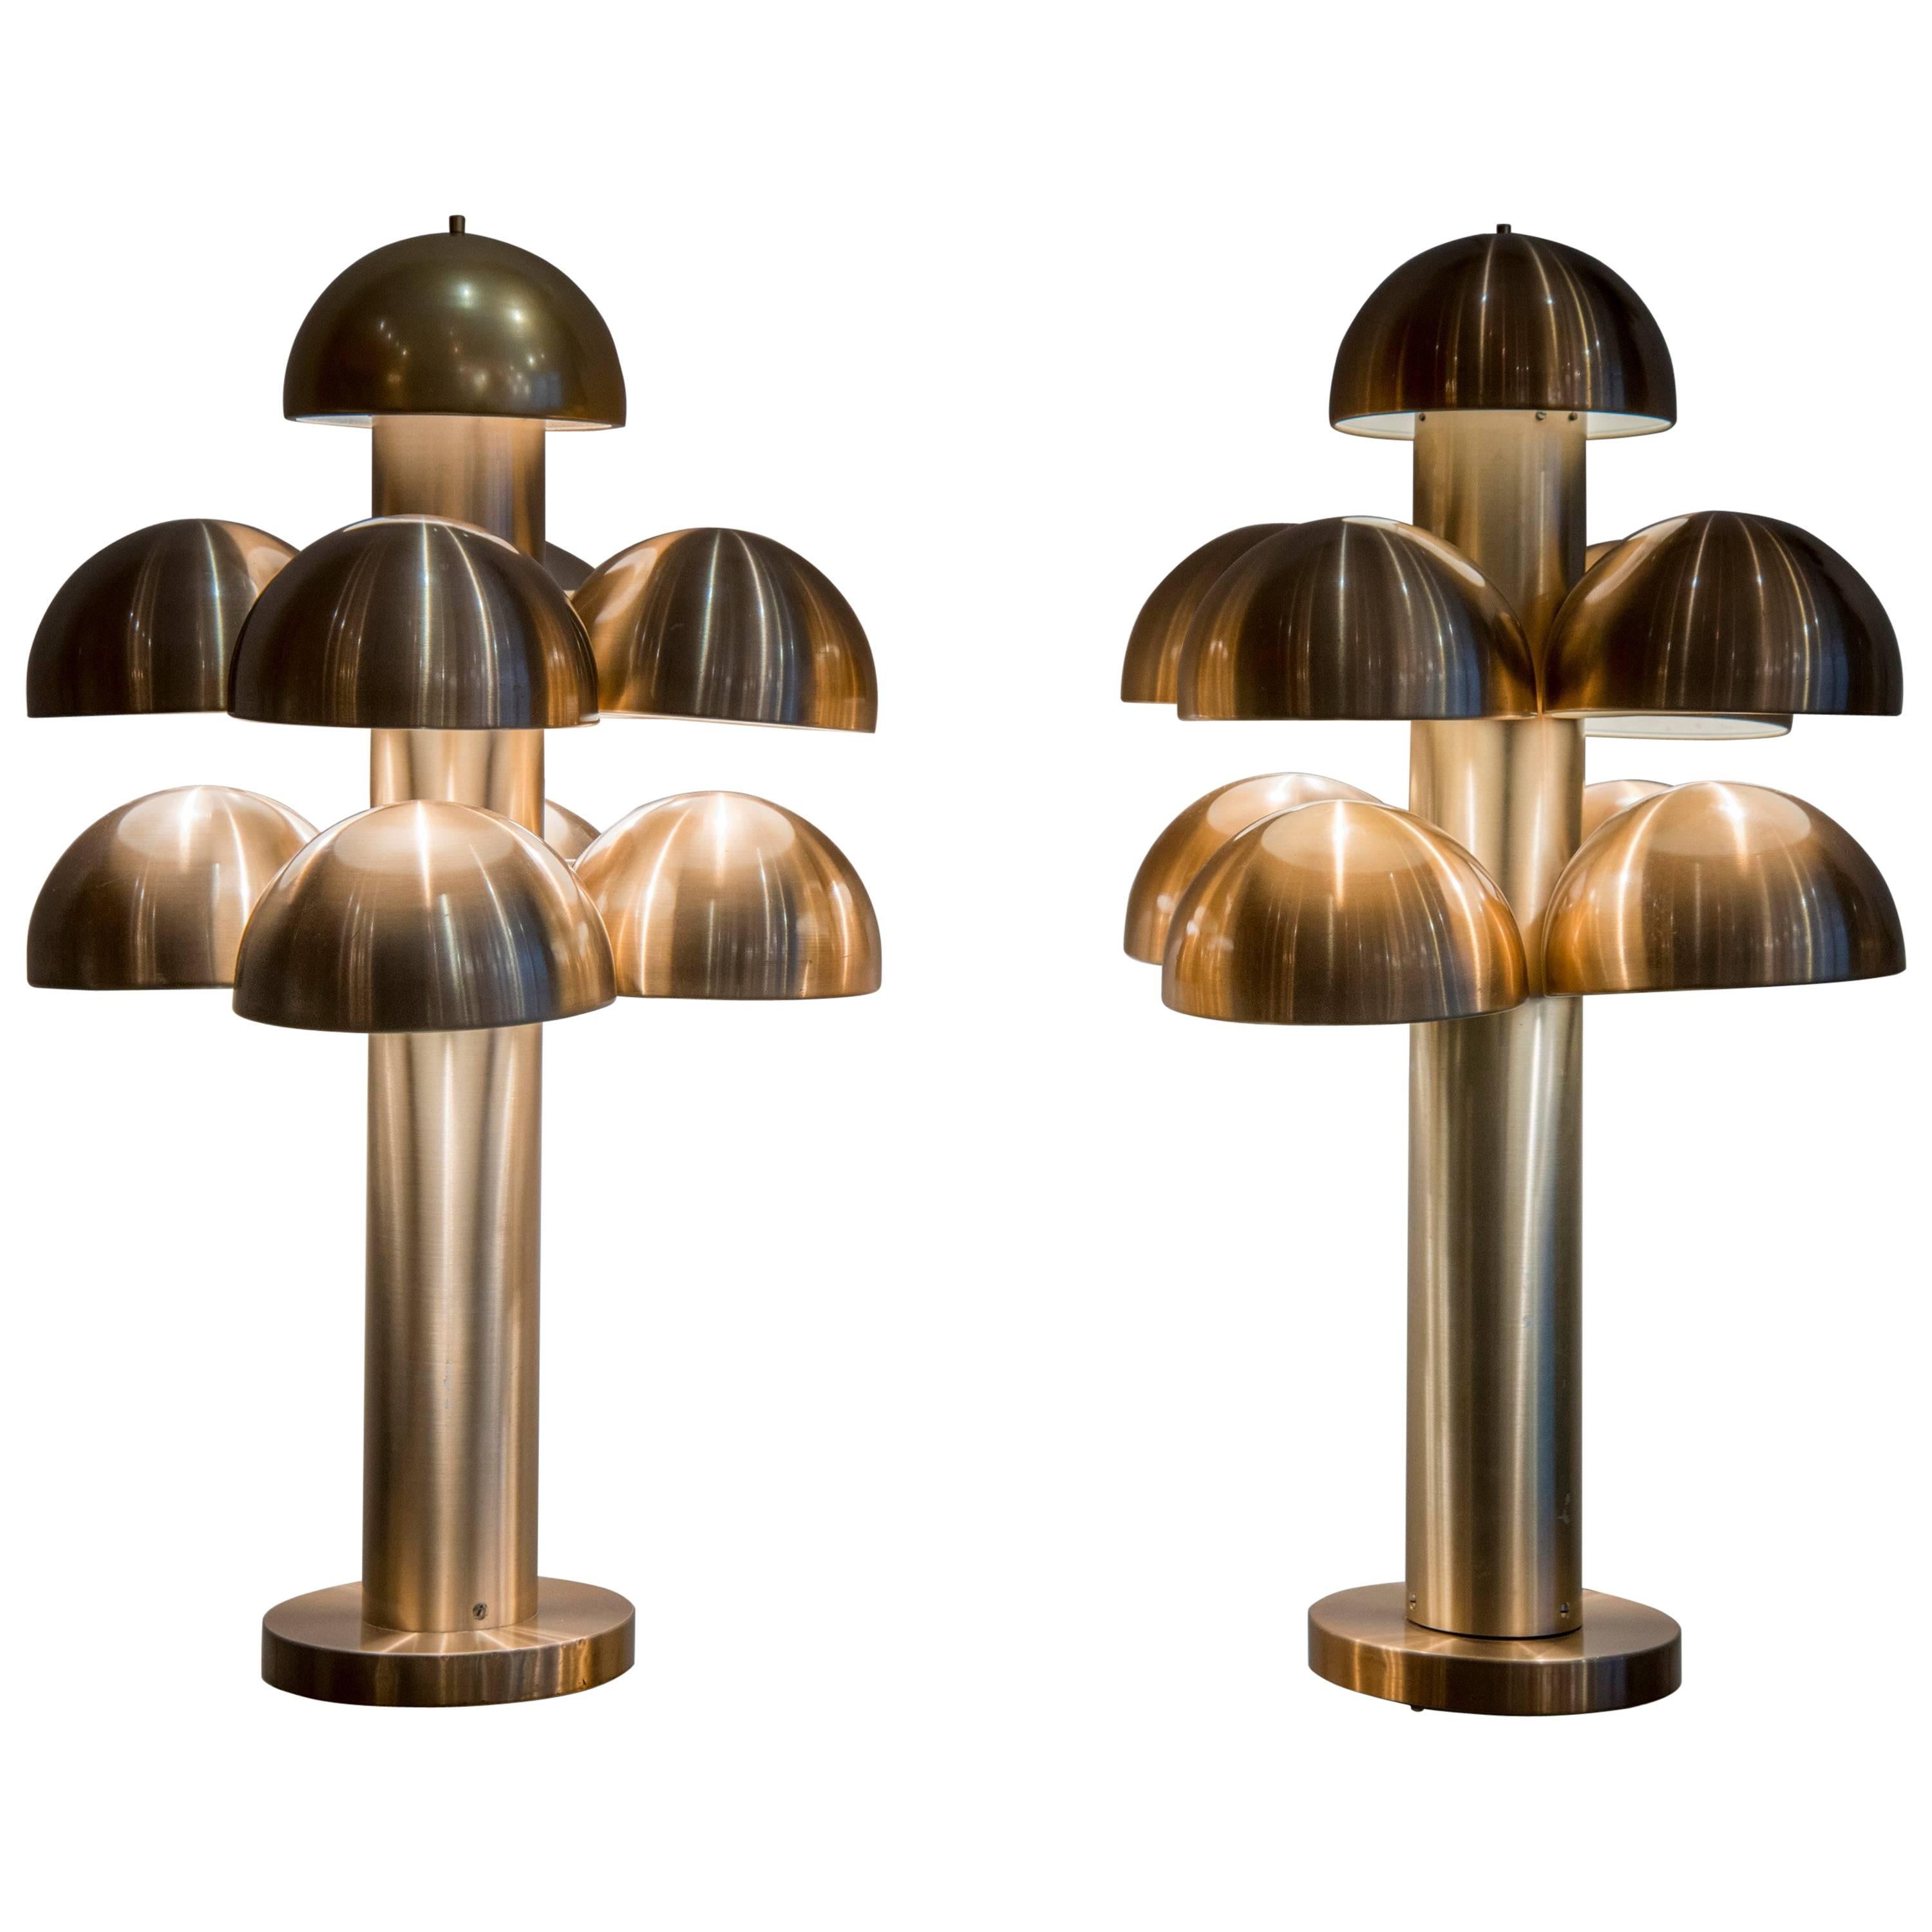 Pair of "Cantharelle" Table Lamps by RAAK